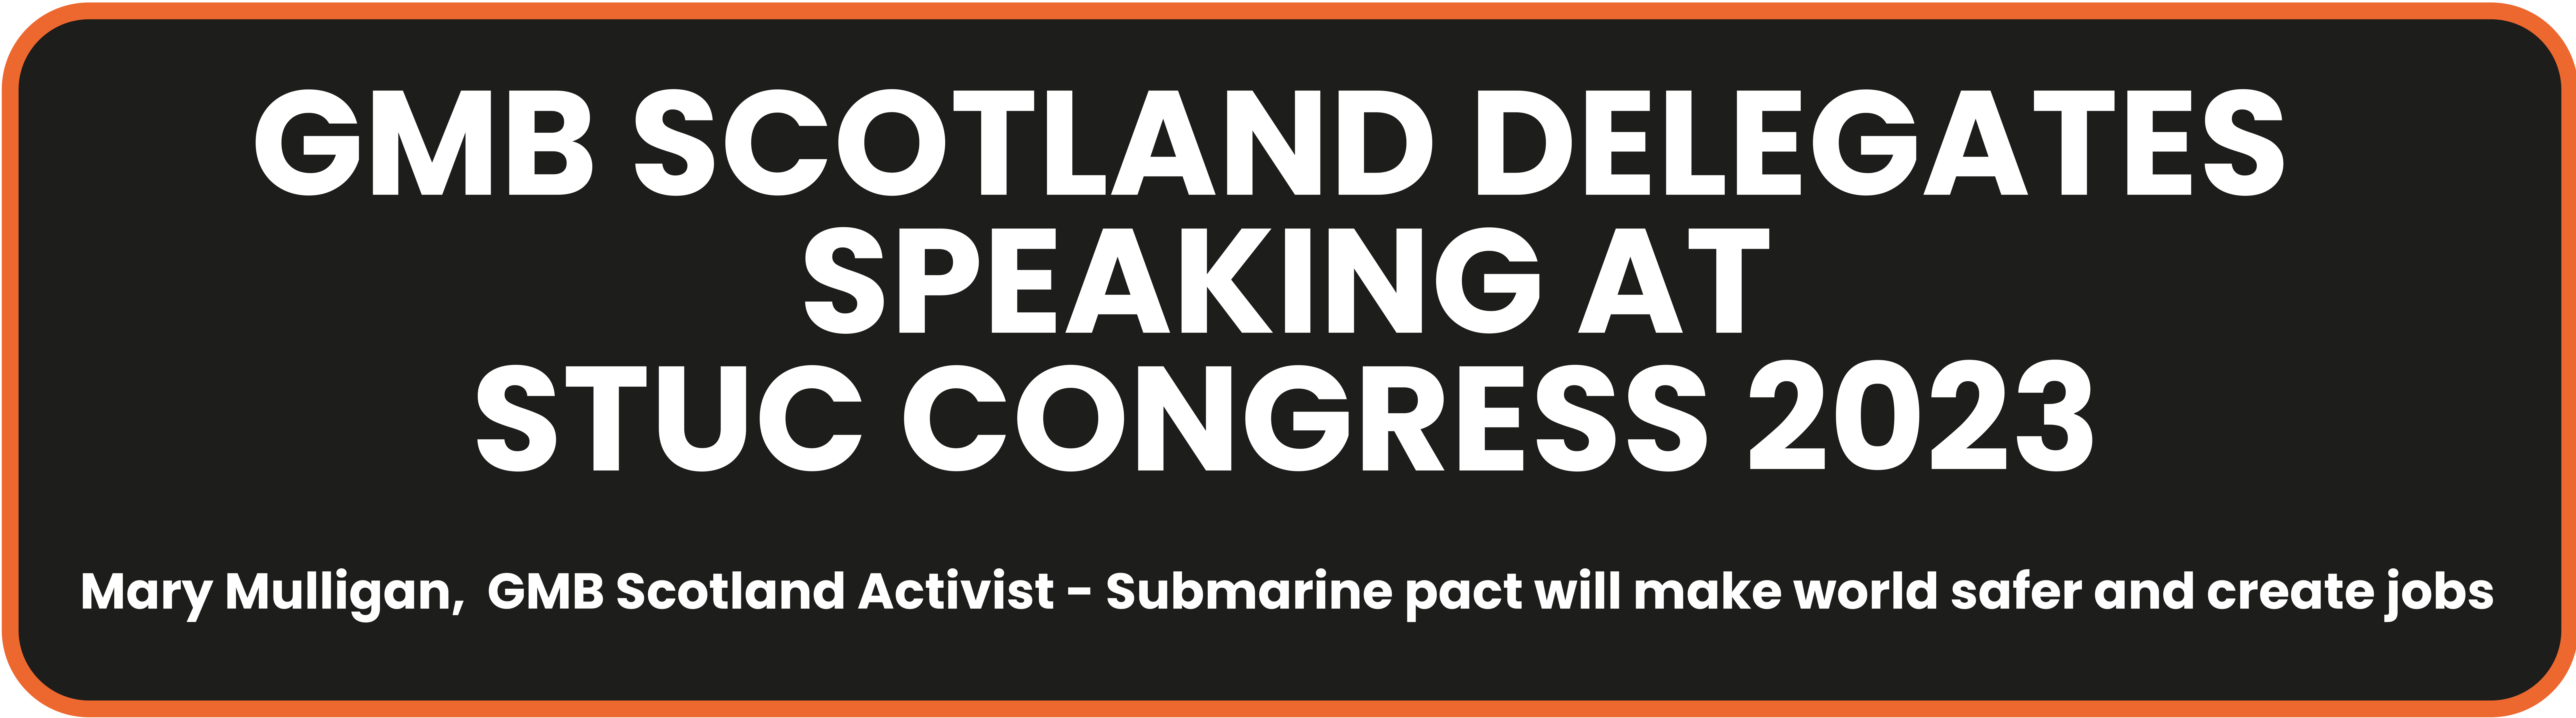 GMB Scotland at STUC: Submarine pact will make world safer and create jobs